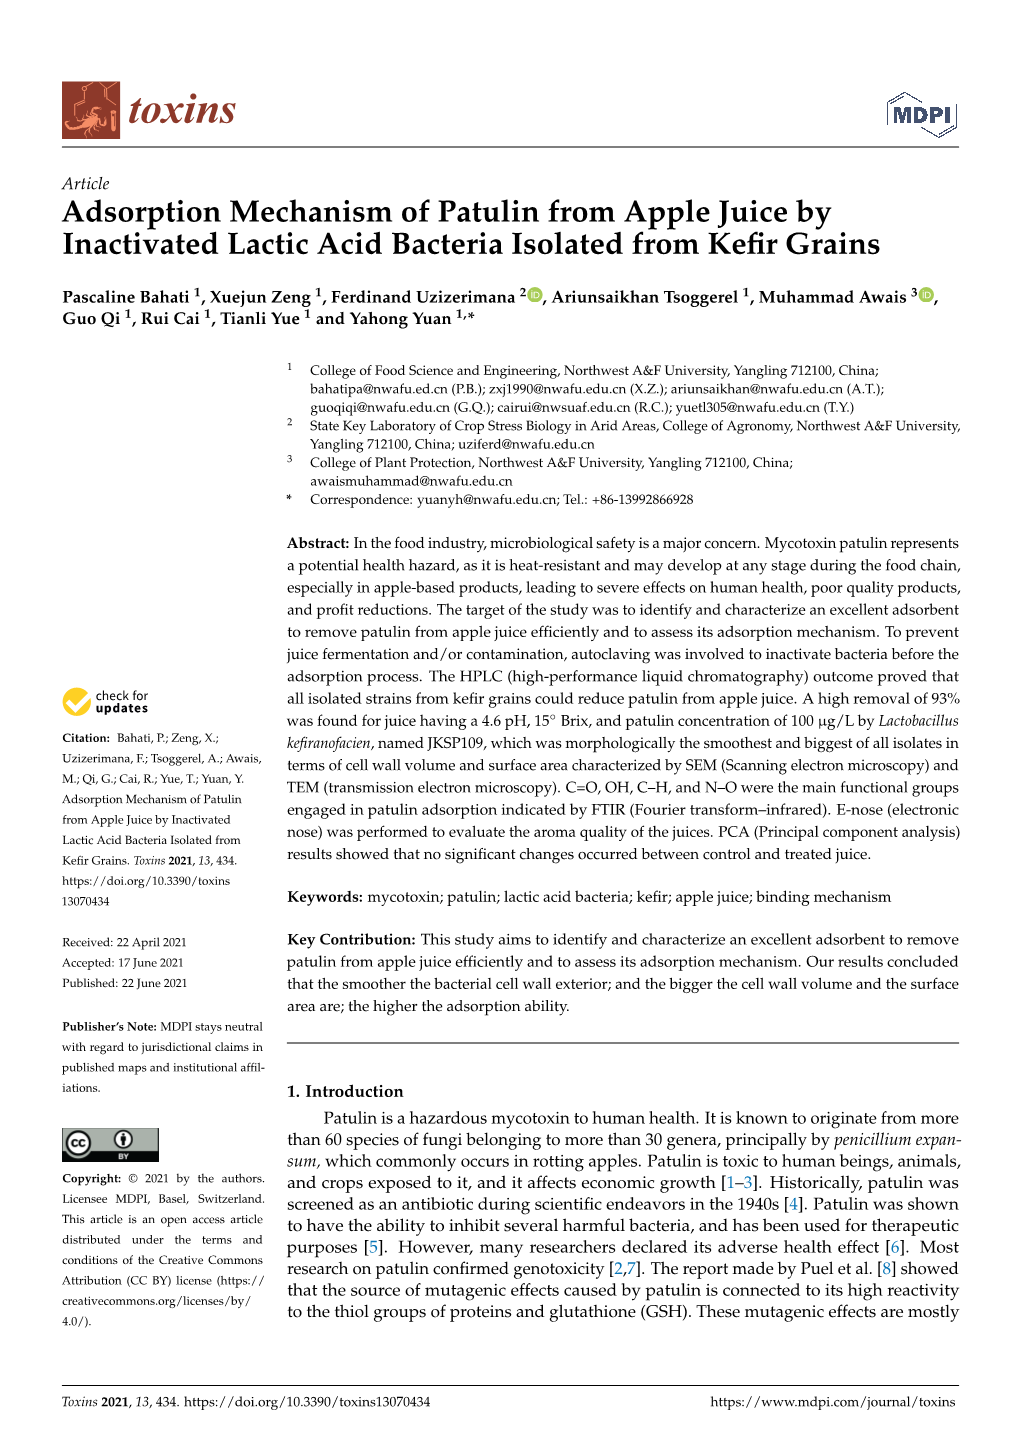 Adsorption Mechanism of Patulin from Apple Juice by Inactivated Lactic Acid Bacteria Isolated from Keﬁr Grains